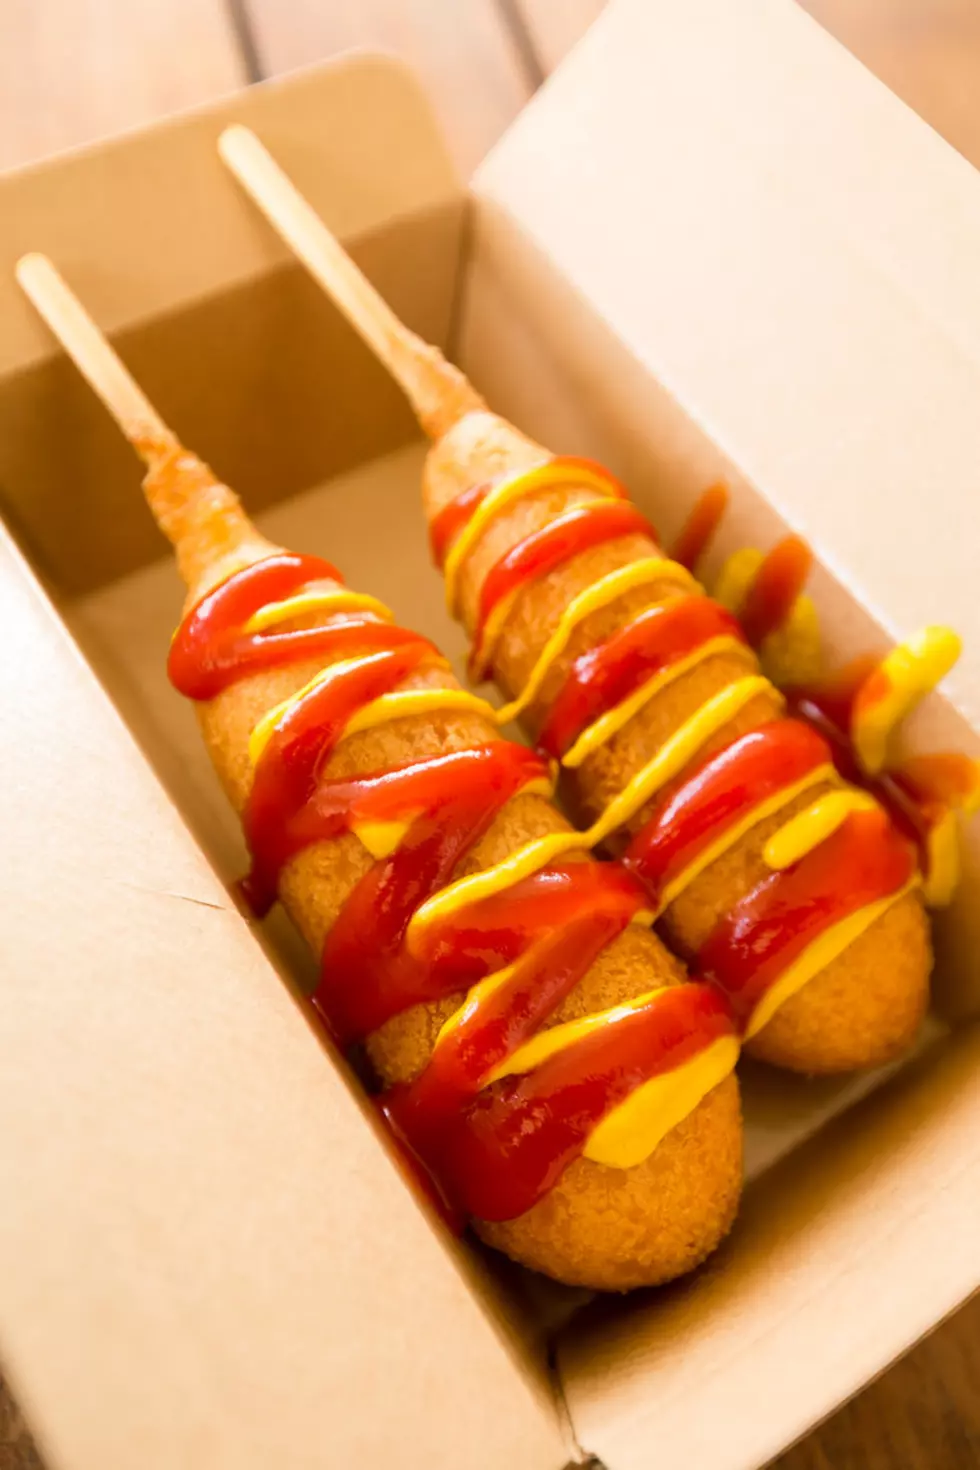 A Husband Risked His Life In A Snowstorm To Bring His Wife Corndogs